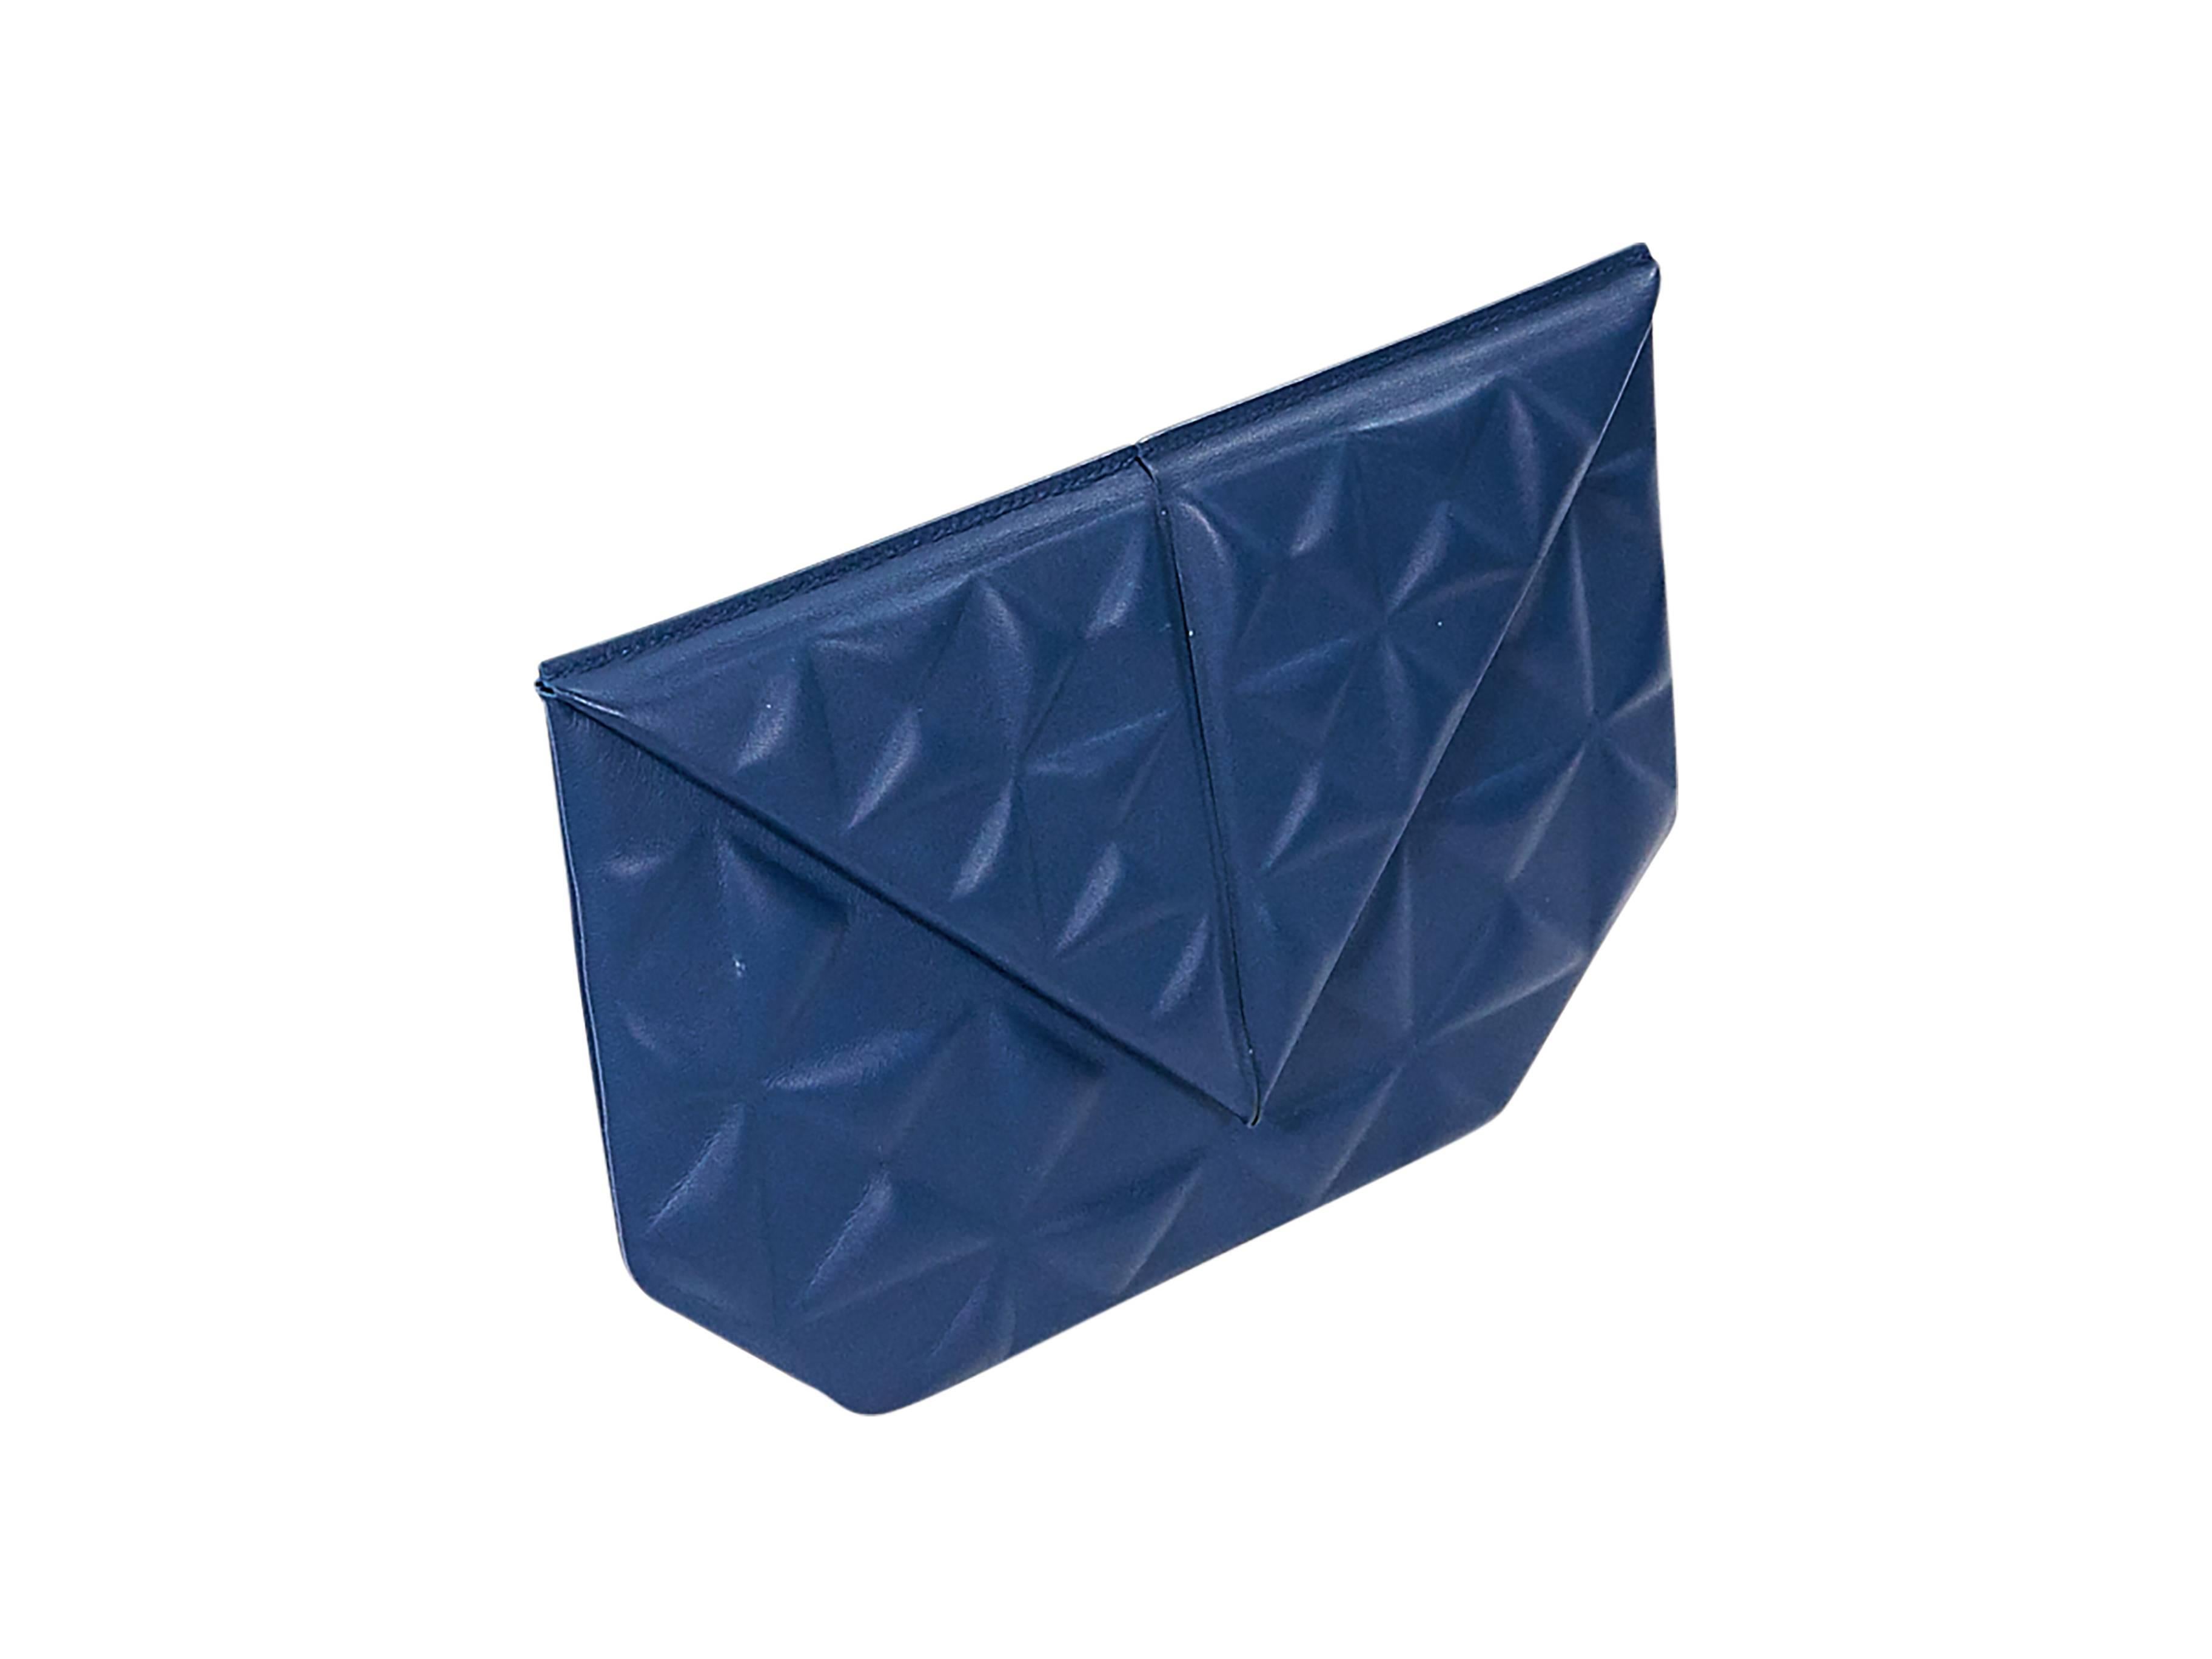 Product details:  Blue embossed leather Classico II clutch by Roland Mouret.  Exterior zip pocket over front flap.  Origami-style front flap.  Hidden magnetic closure.  Lined interior with inner zip pocket.  10"L x 6.75"H x 0.5"D.